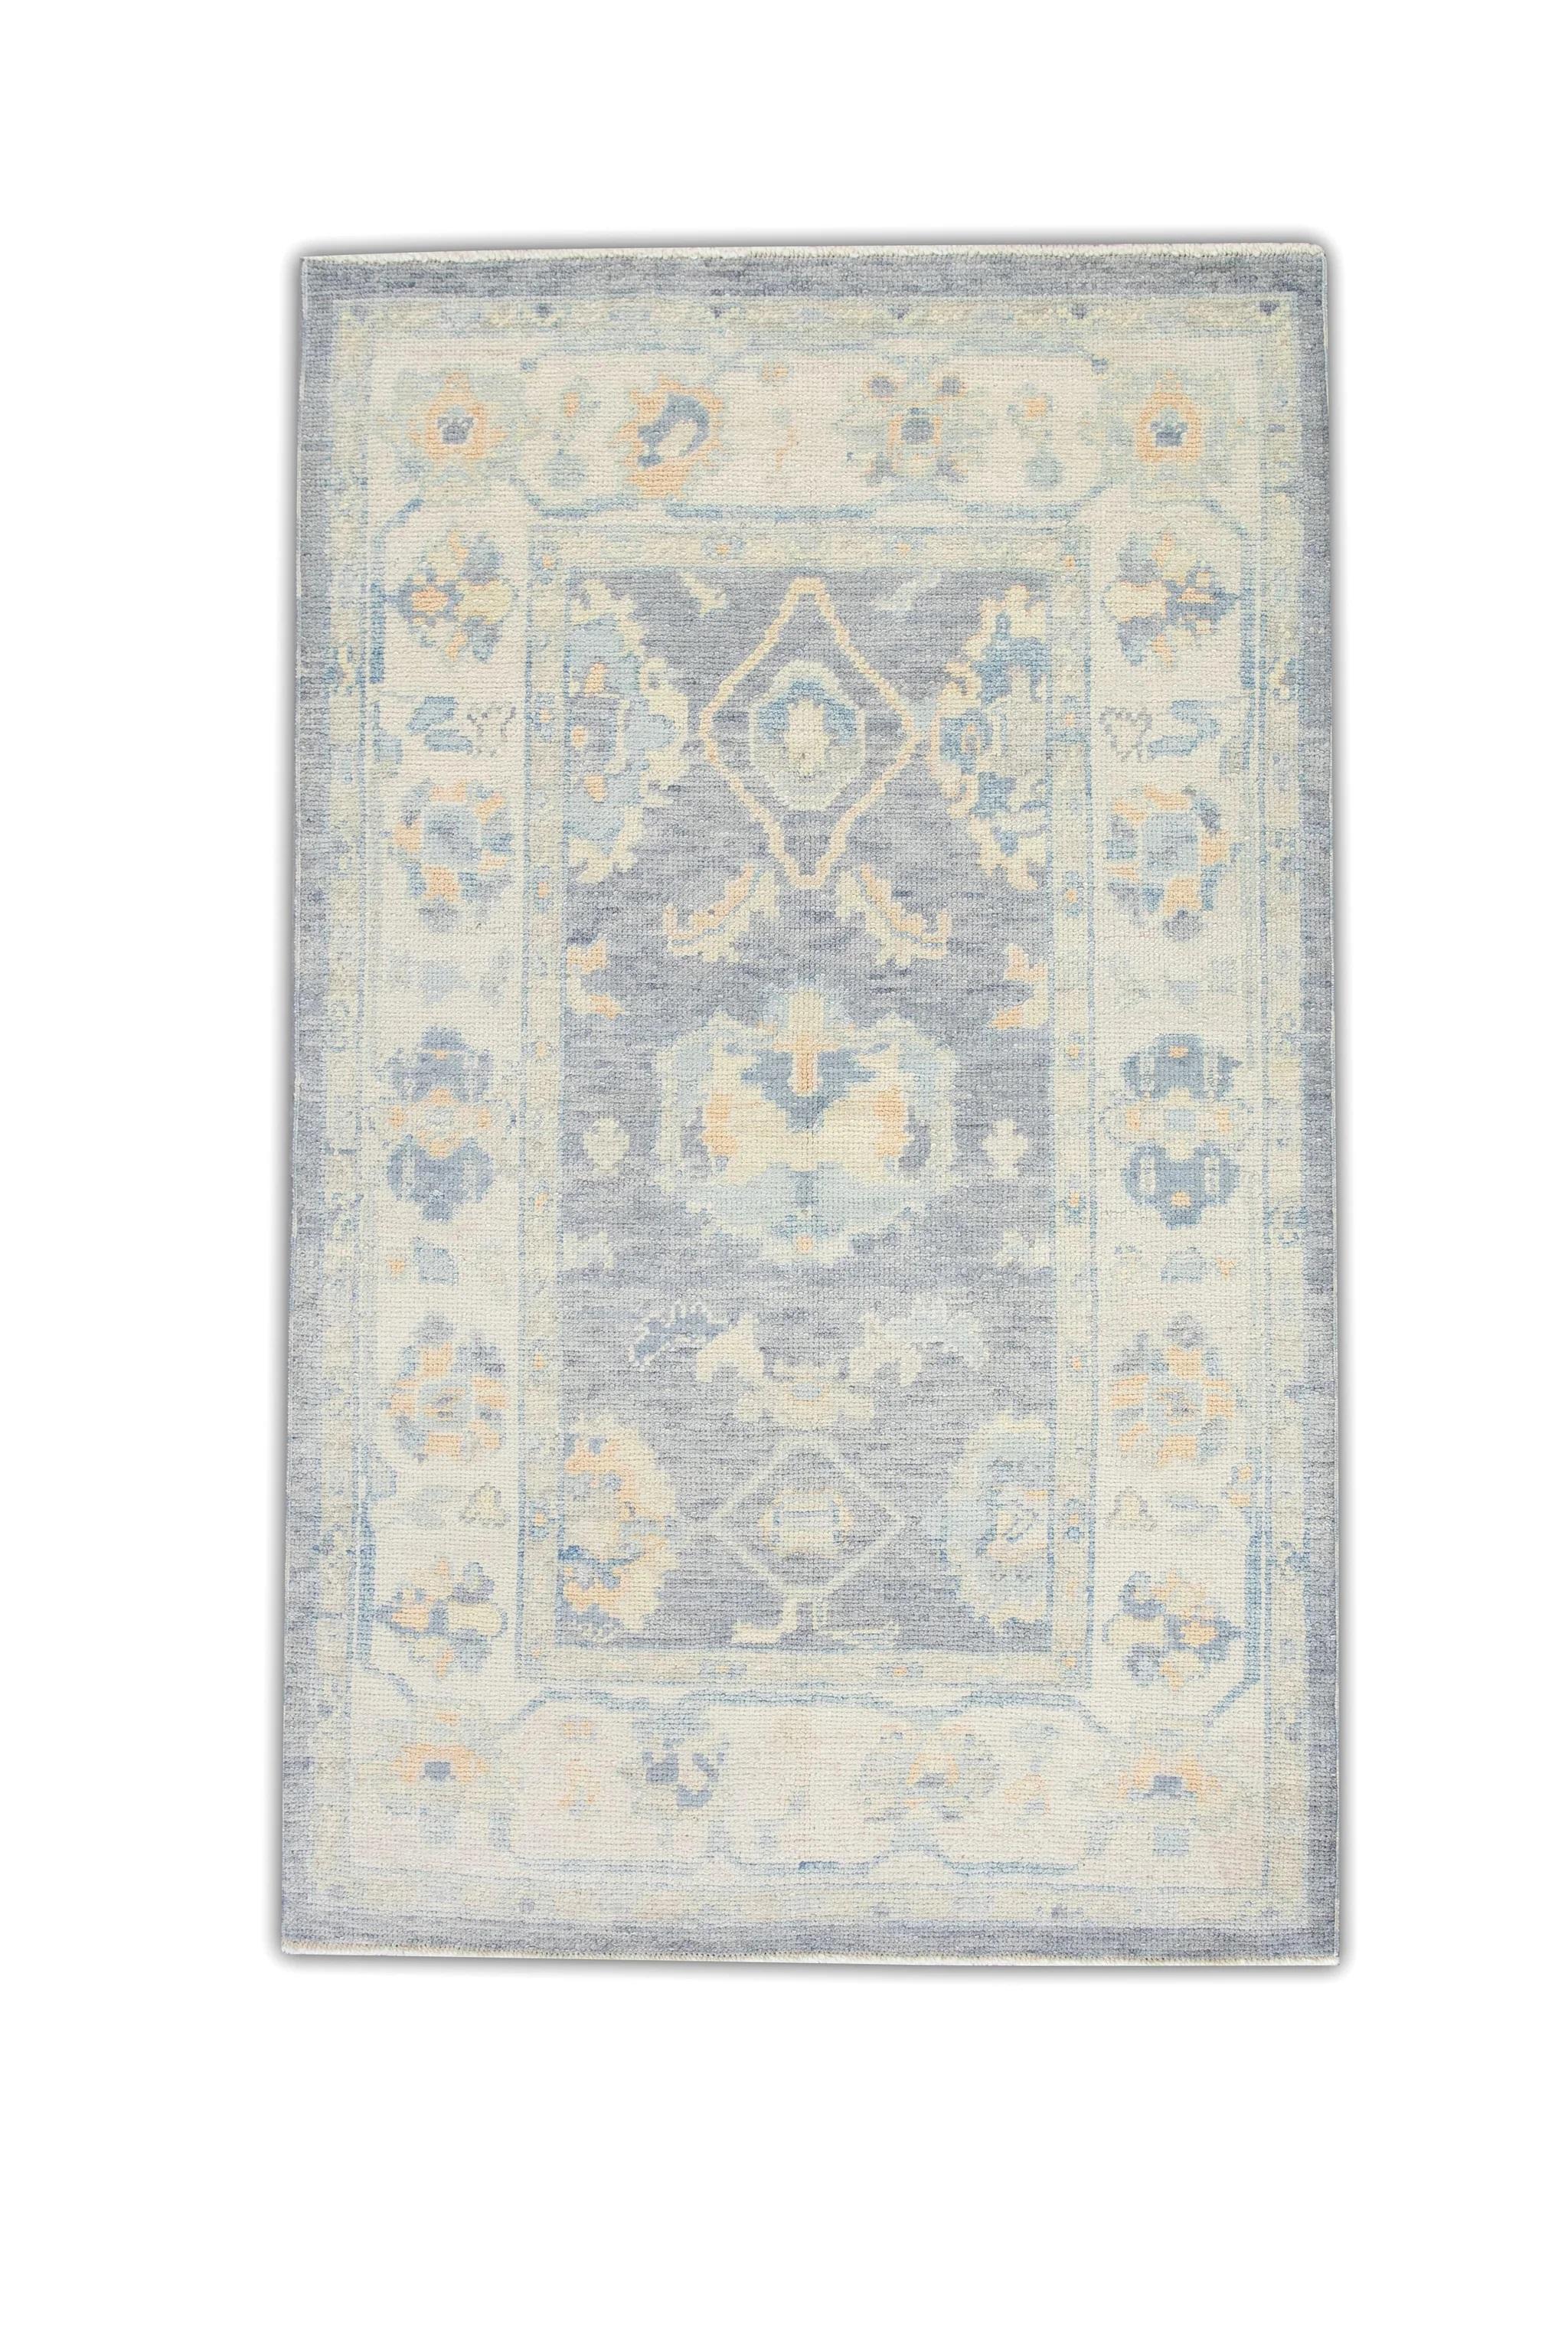 Contemporary Periwinkle Blue Floral Design Handwoven Wool Turkish Oushak Rug 3'10